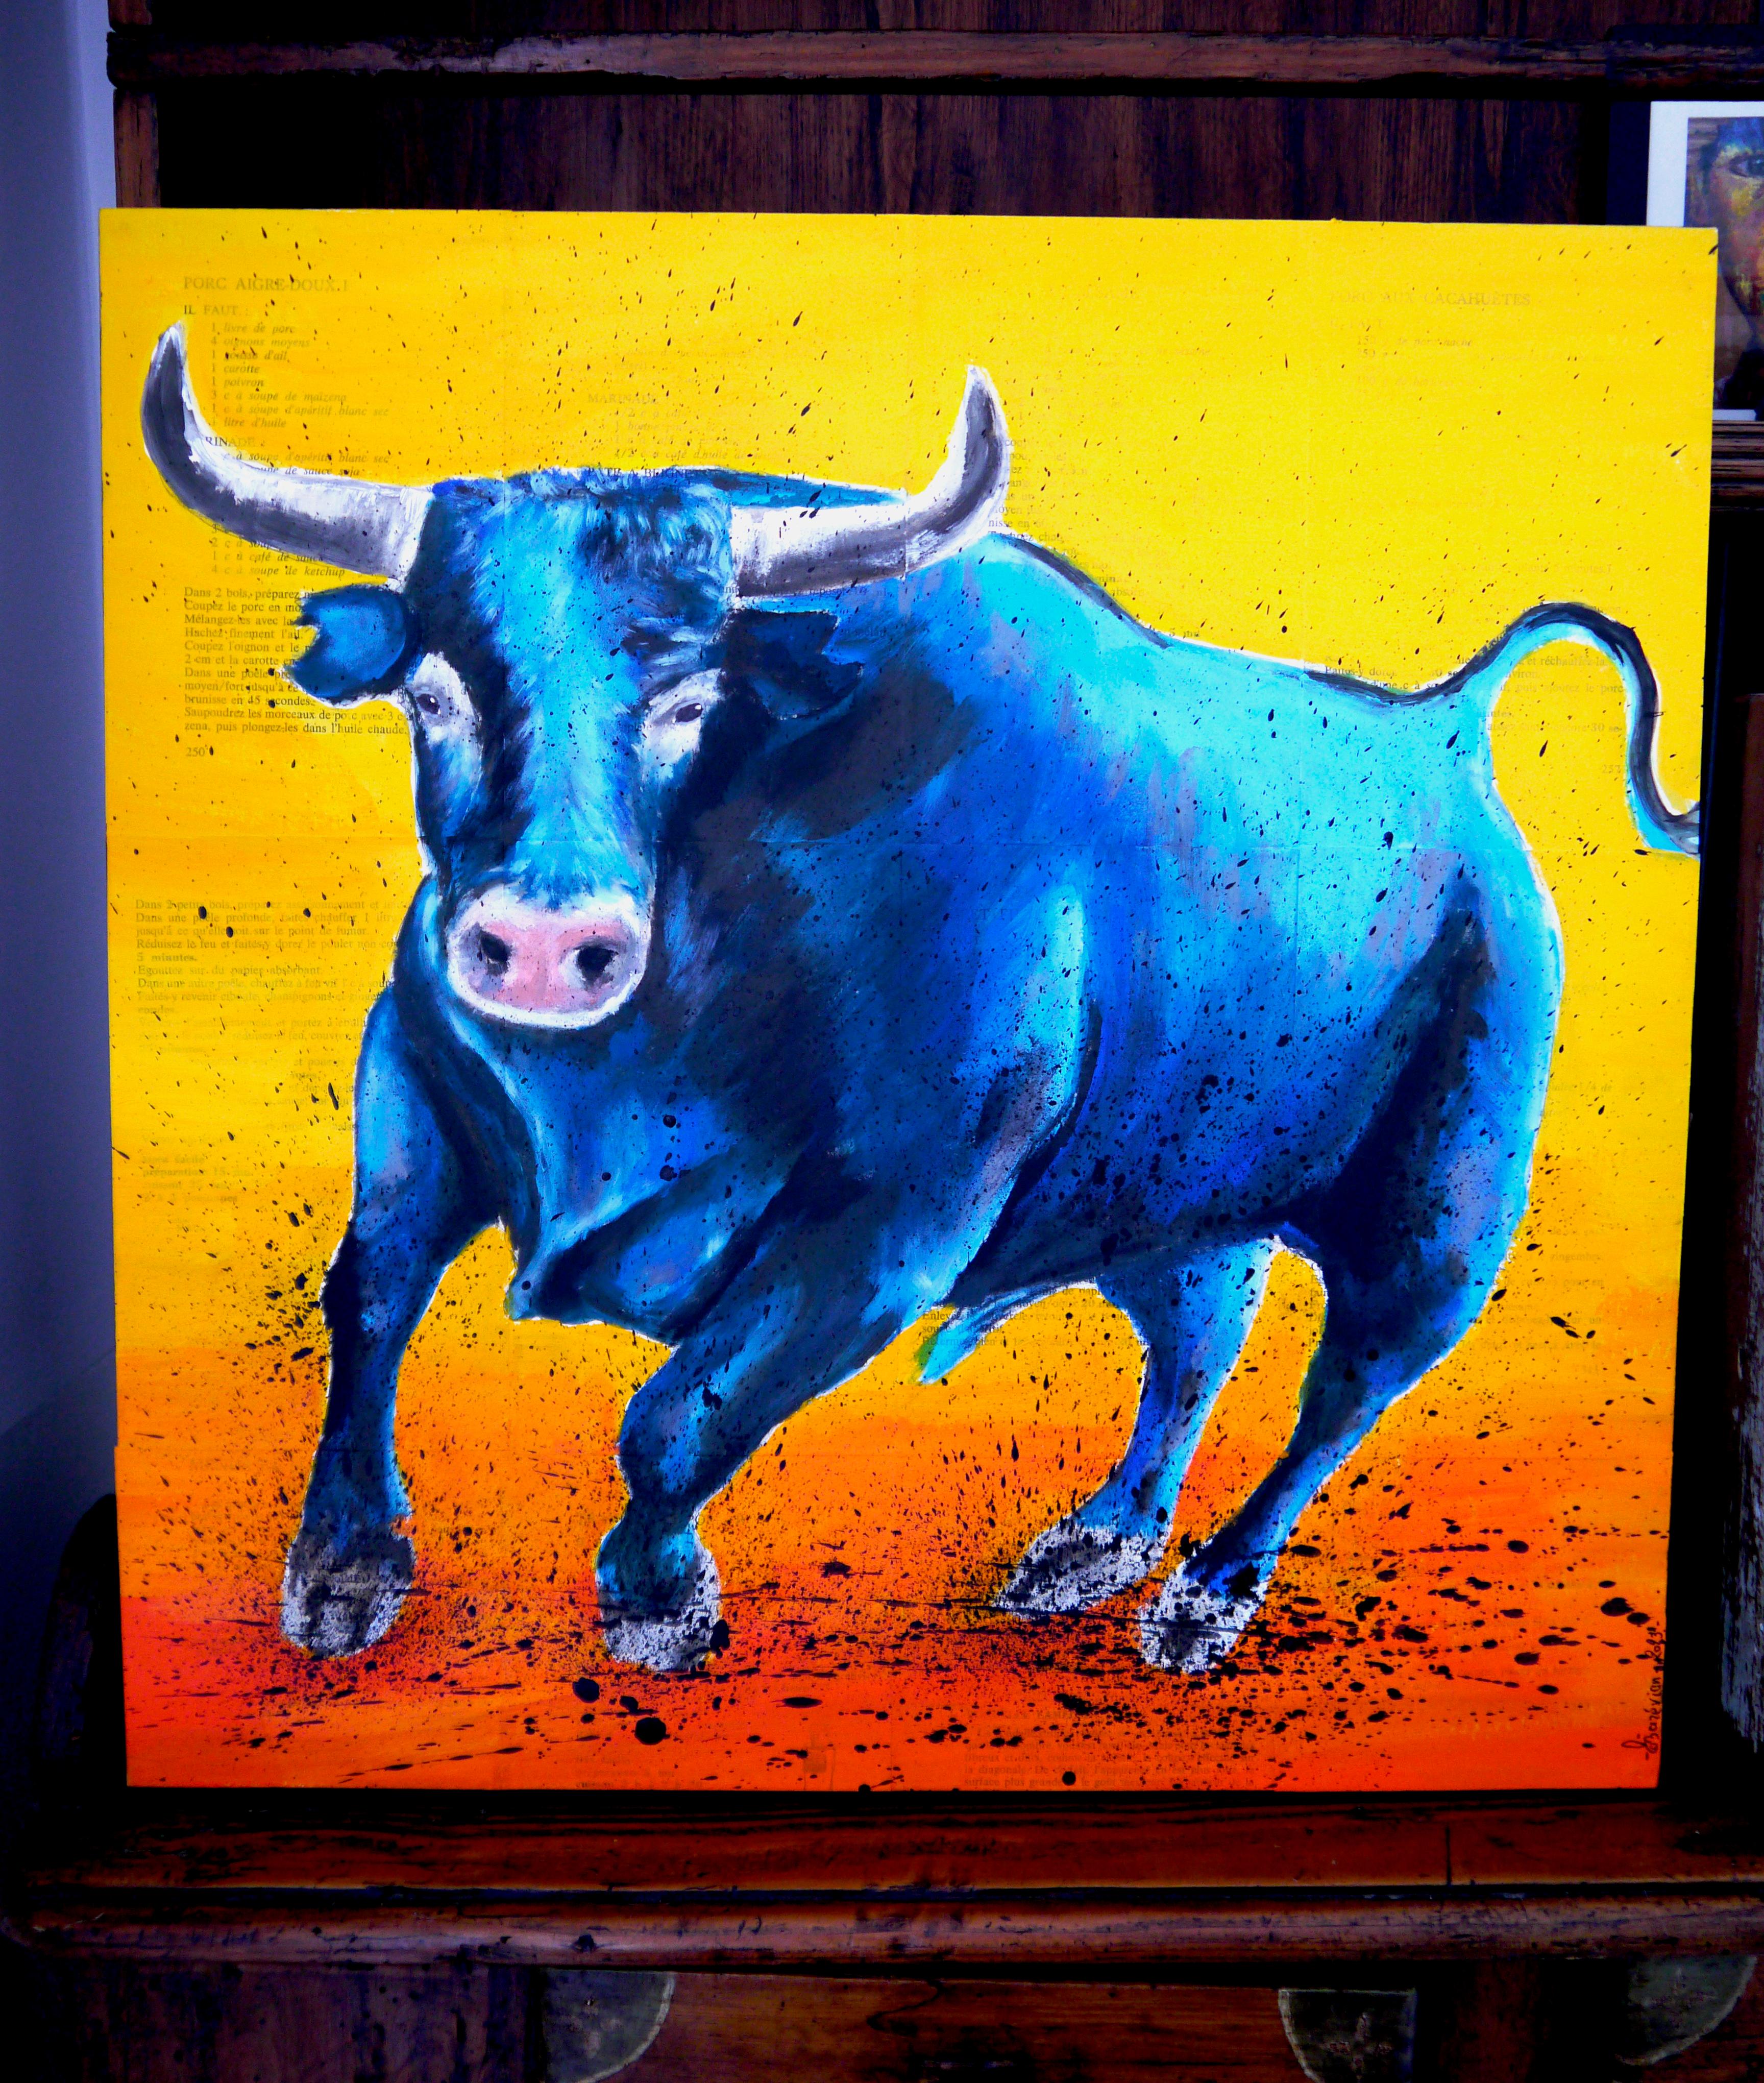 Blue Bull III

Animal portrait
Technique: oil, acrylic, and ink on old book pages on wooden frame 55x55cm ■■ 21,6x21,6 inch

Sustainability: Wooden frame is made by the artist by recycling  old books. In an ecological approach, each packaging is